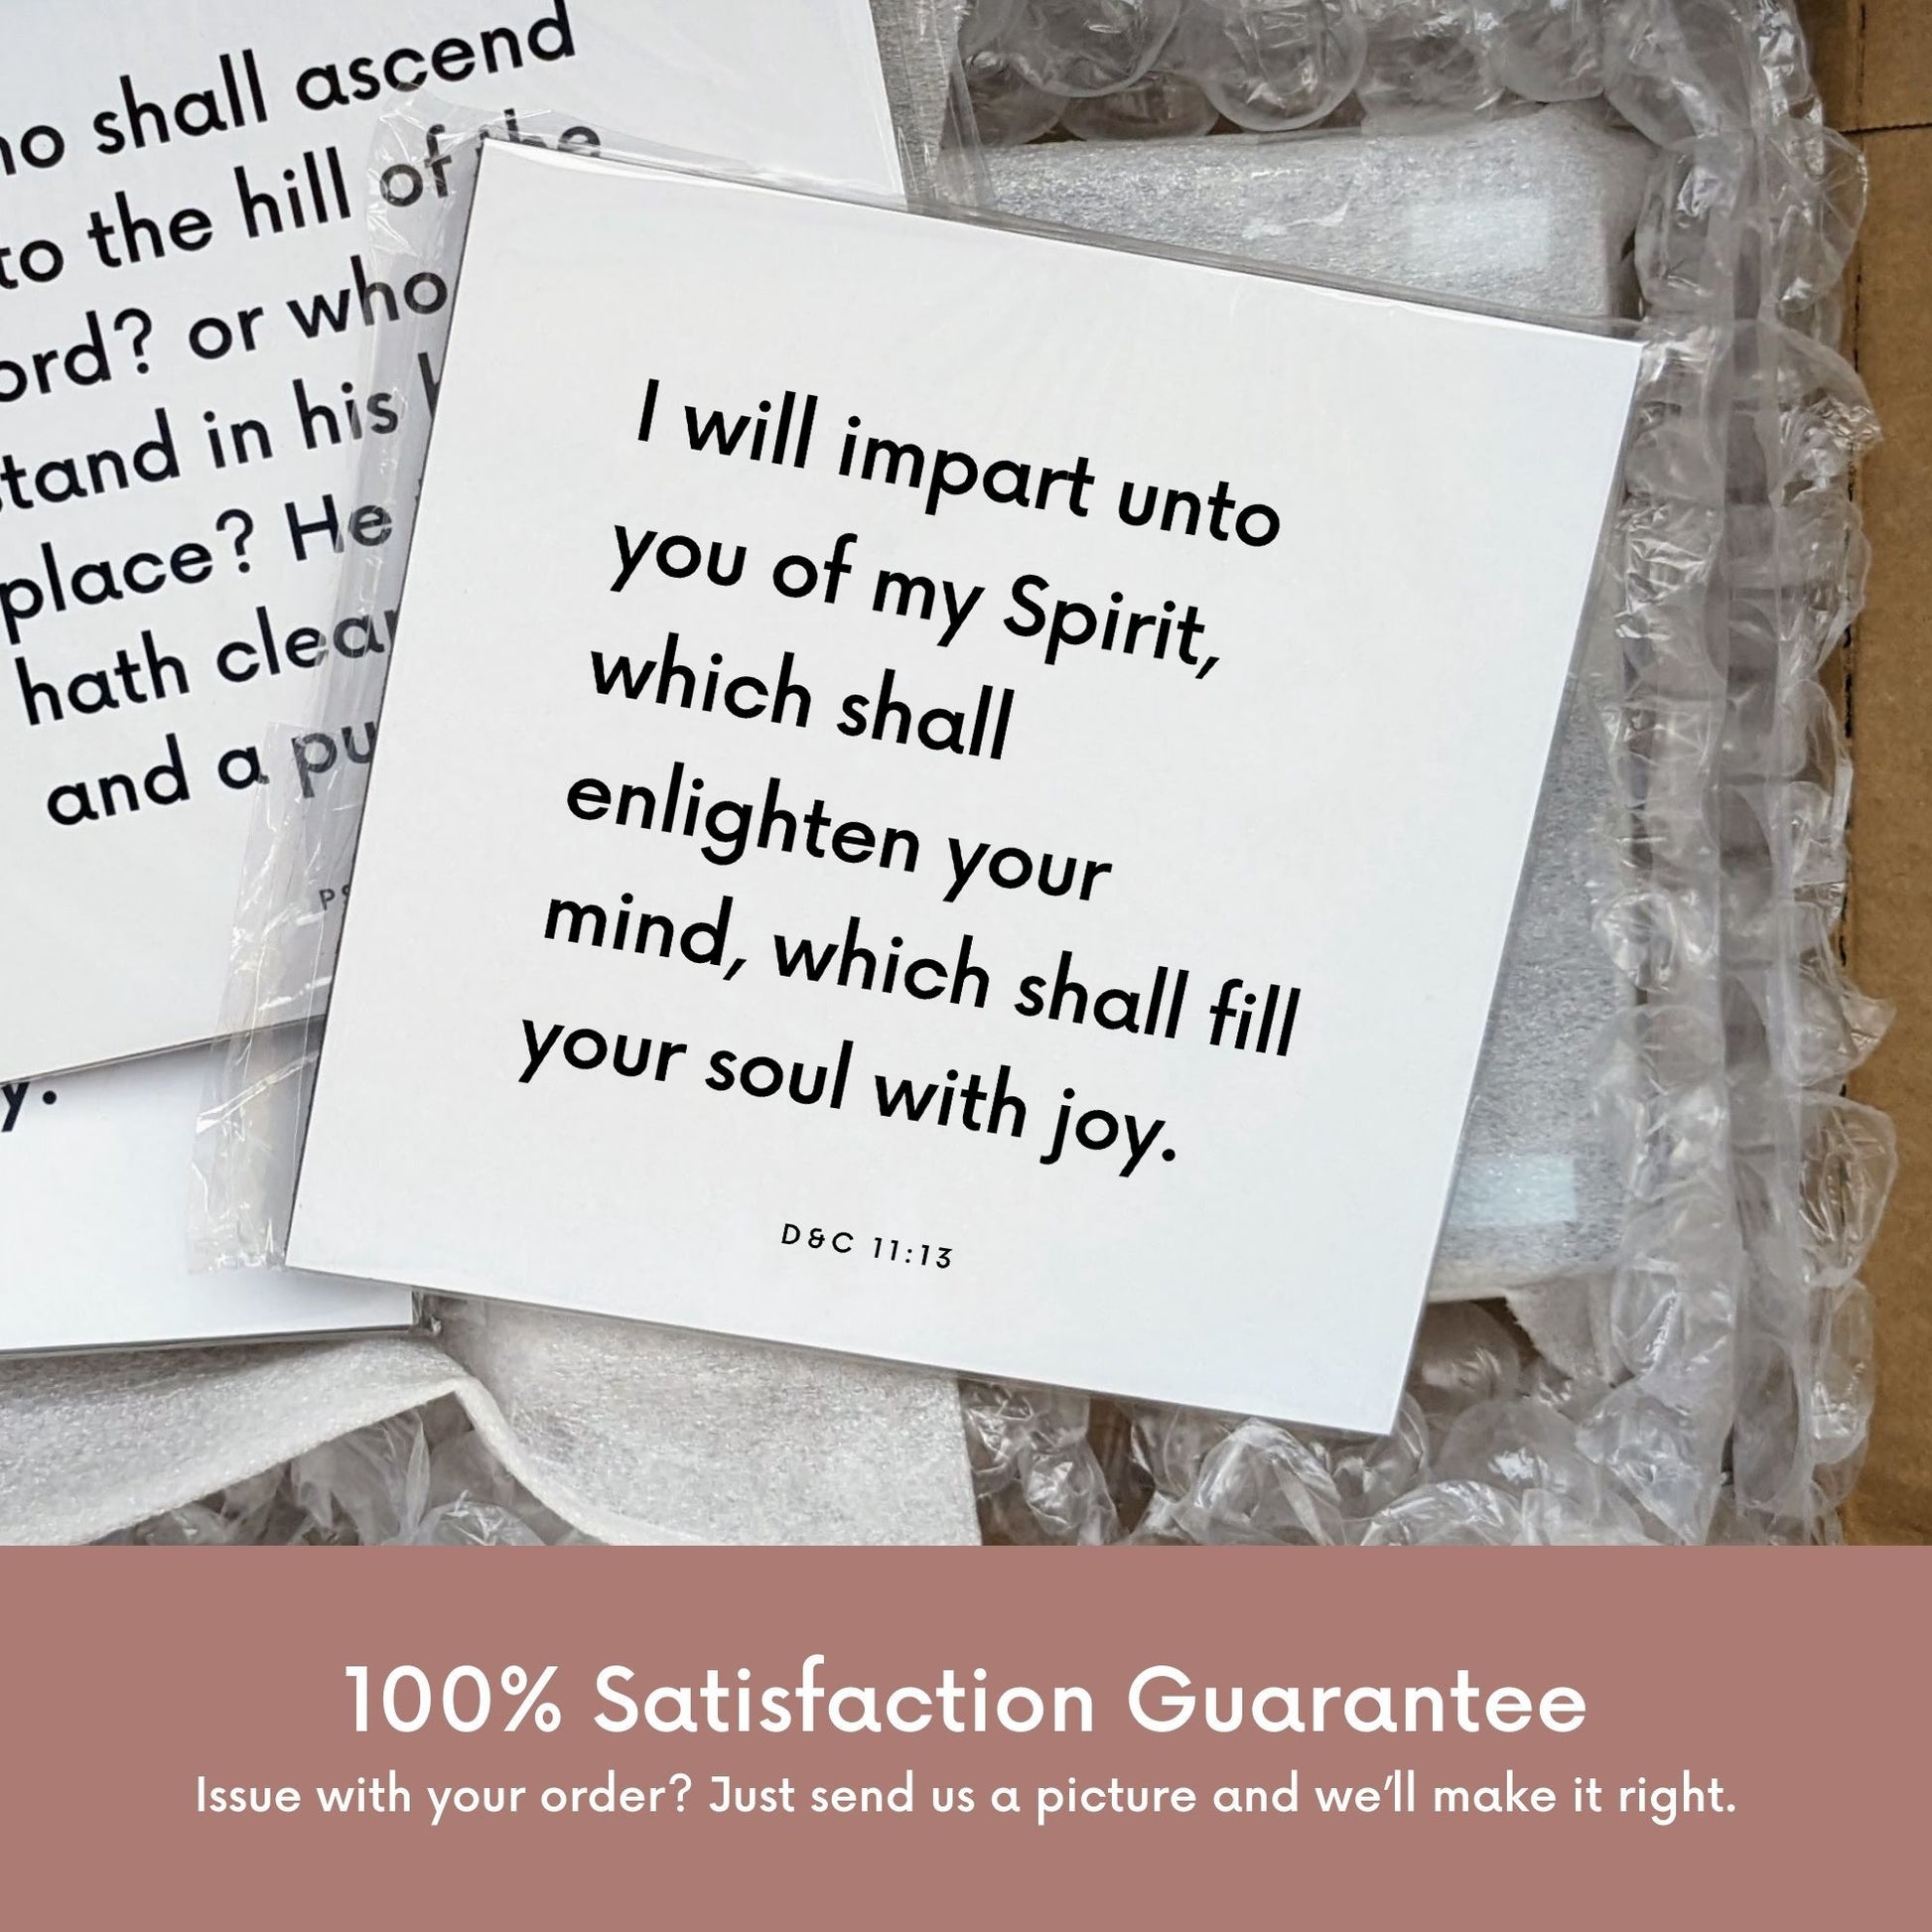 Shipping materials for scripture tile of D&C 11:13 - "I will impart unto you of my Spirit"